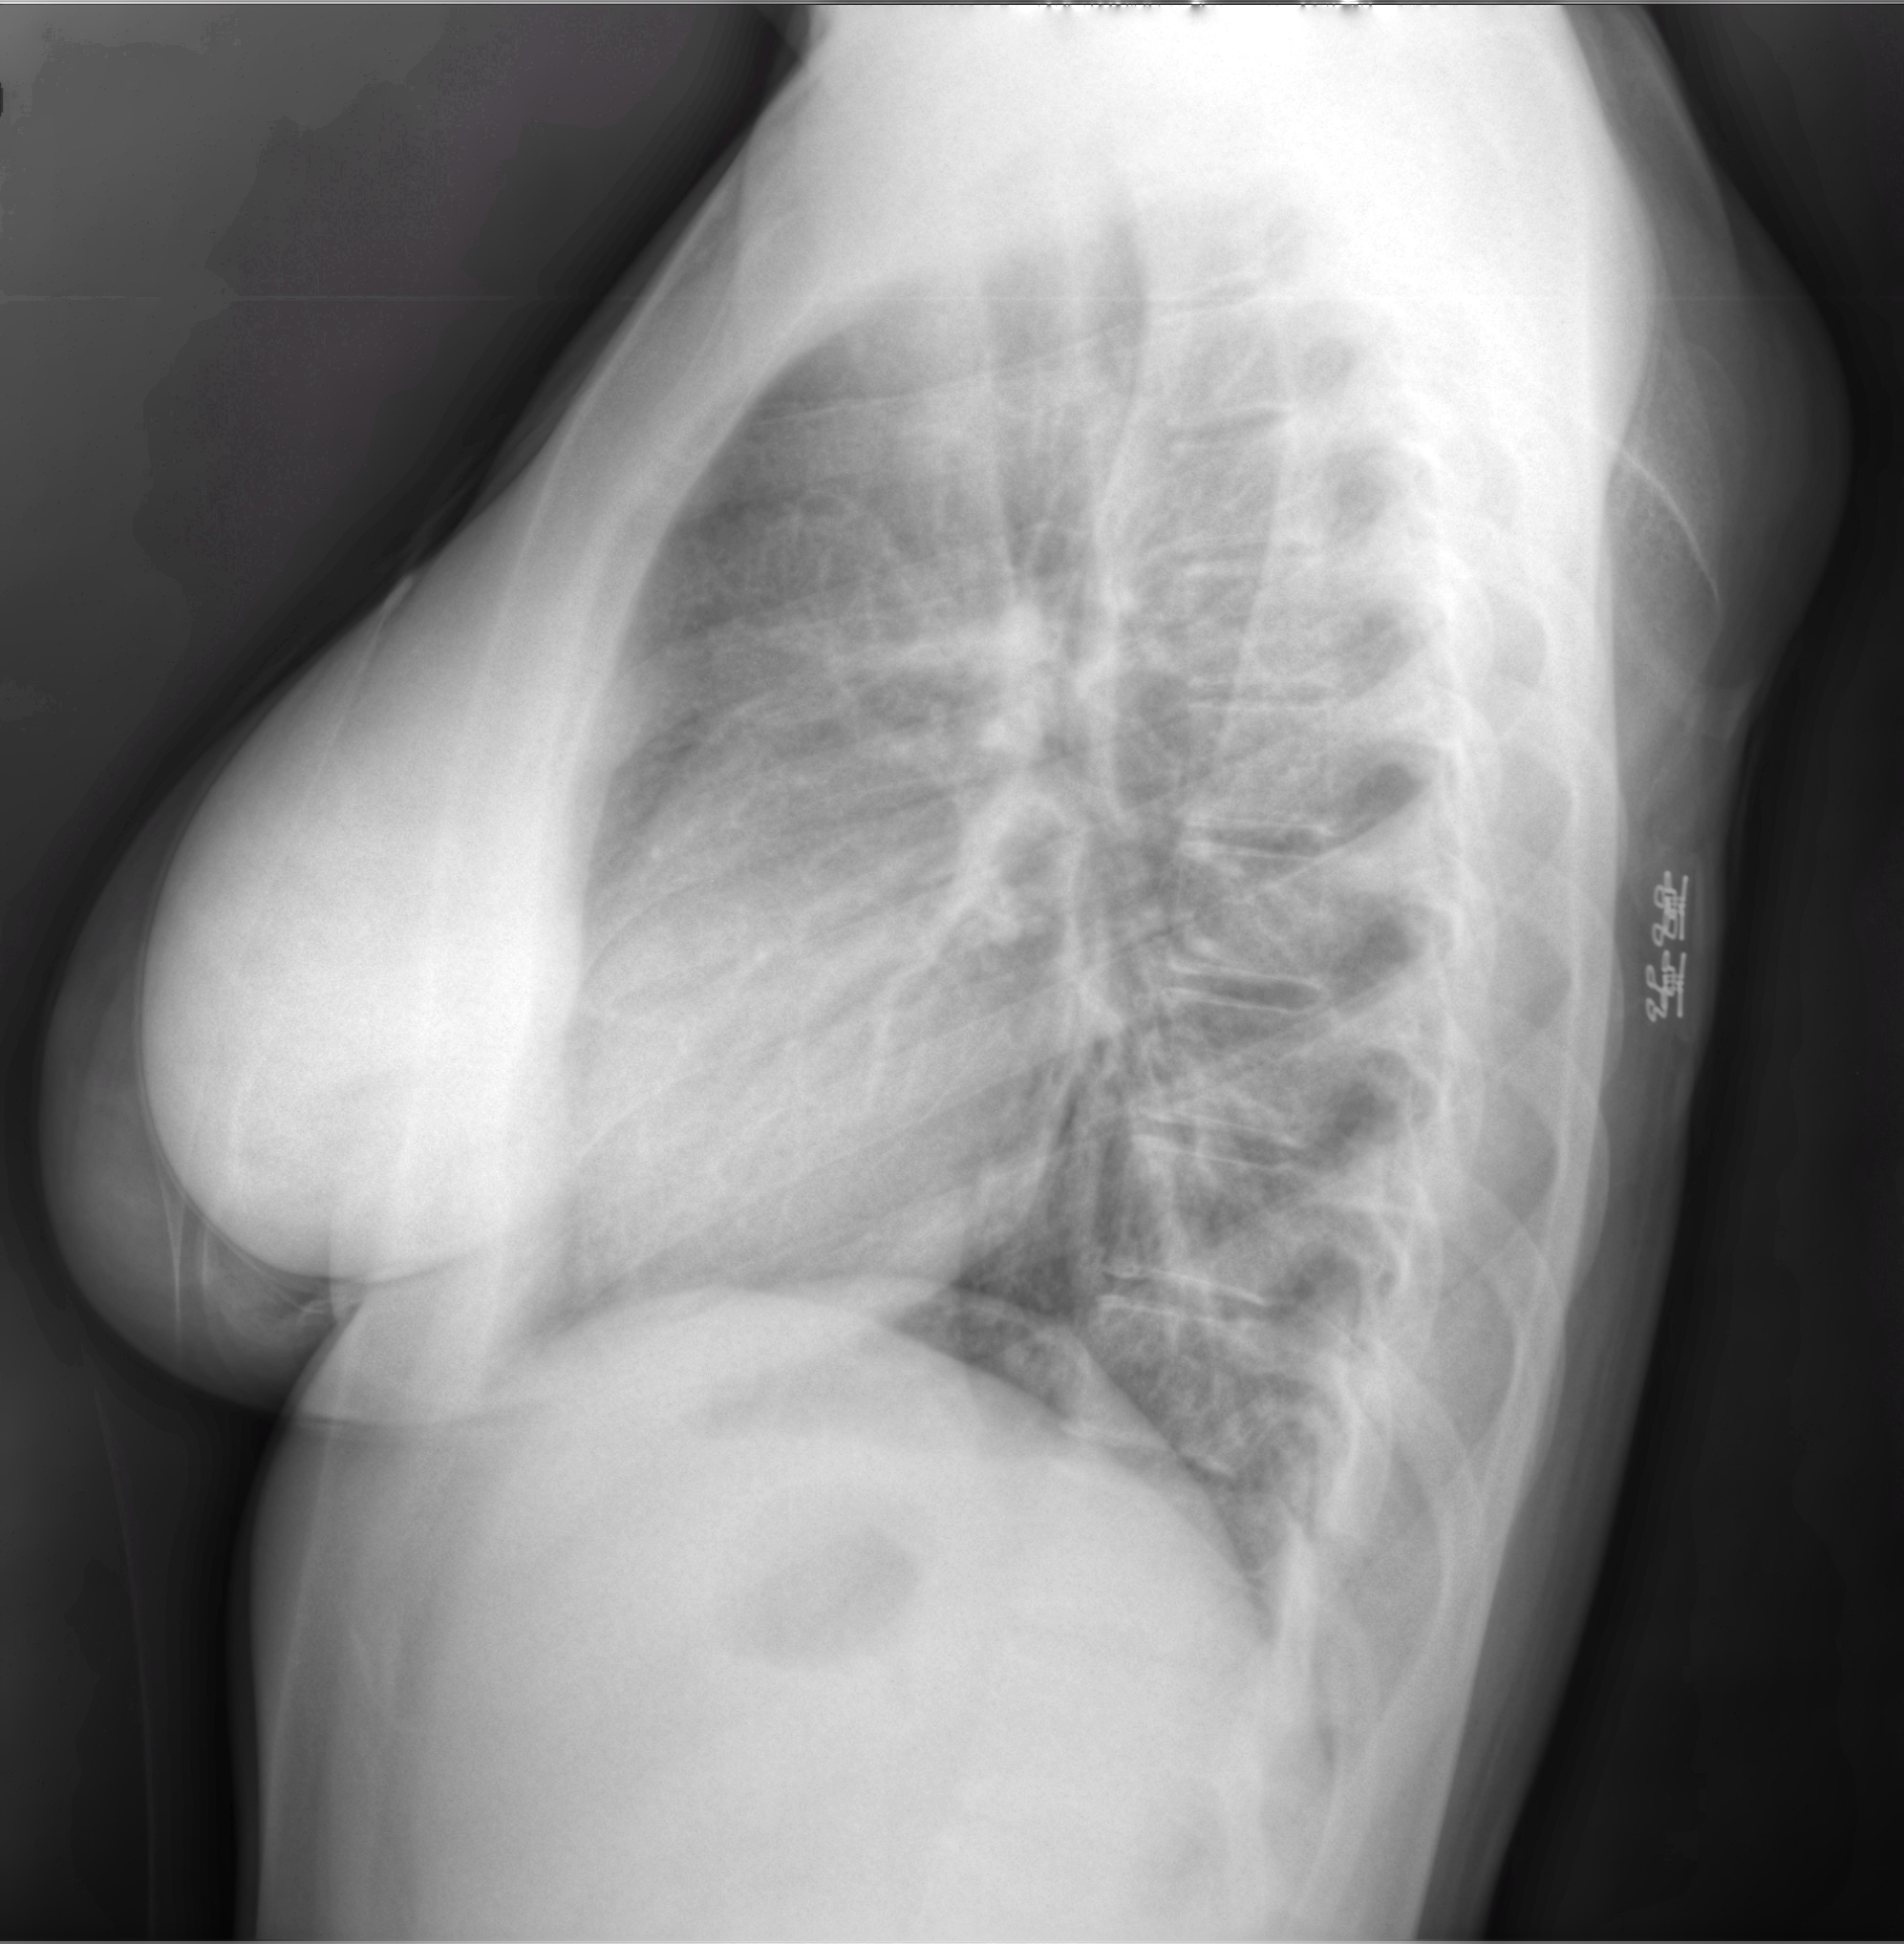 The use of x-rays for diagnostic examination of the breast was introduced in by Stafford Warren. His technique involved the patient lying on her side with her arm raised and having the picture taken from the side.1  1Warren, S.L. "A Roentgenologic Study of the Breast." The American Journal of Roentgenology and Radium Therapy. 24 (1930): 113-124.            